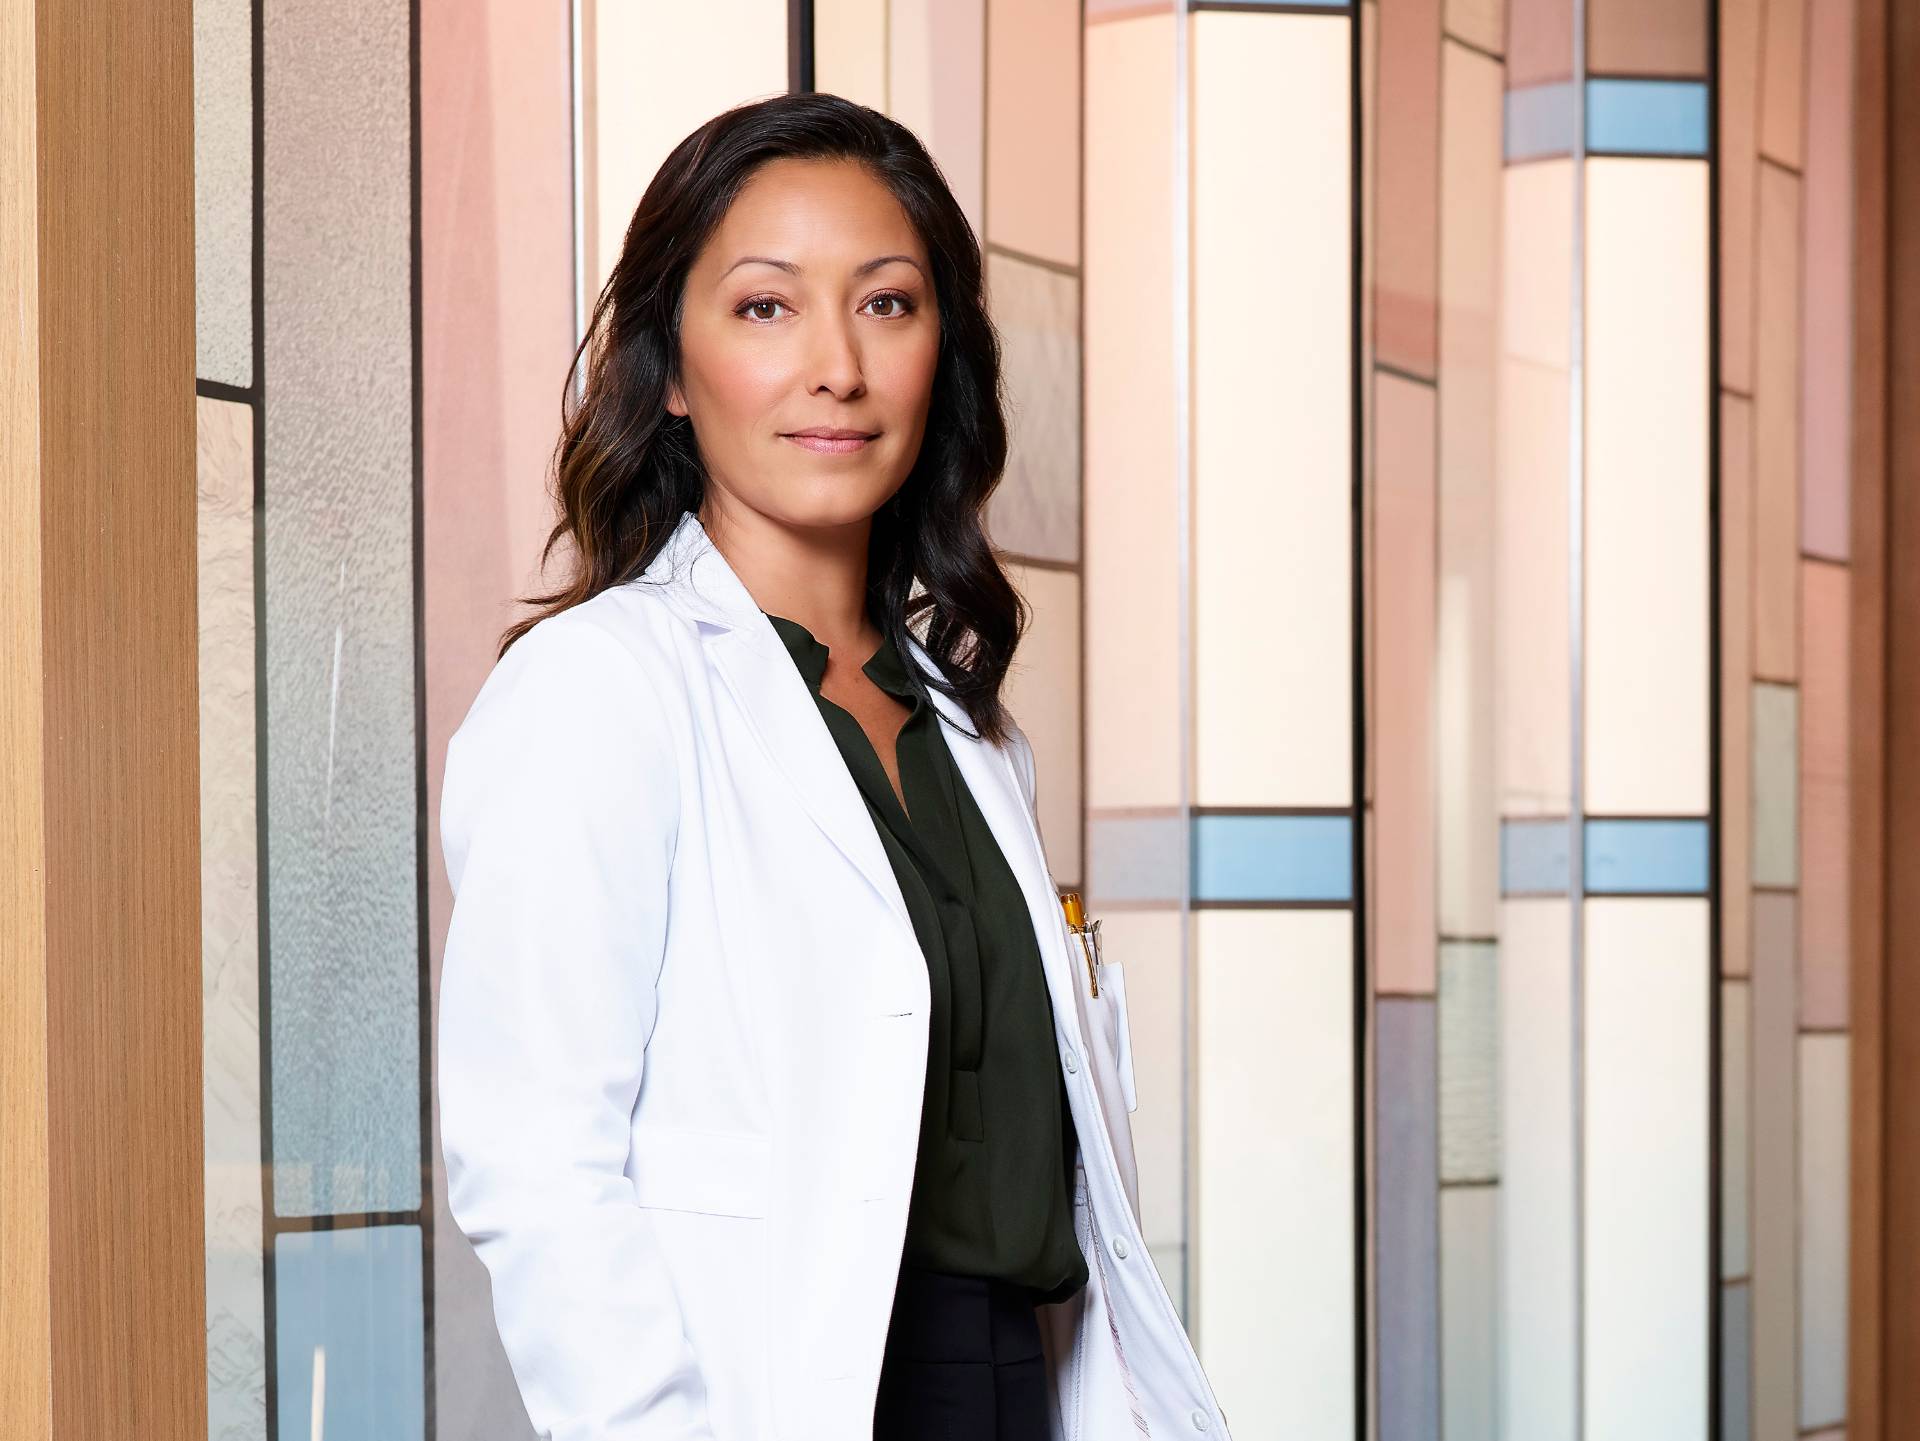 Christina Chang on the set of The Good Doctor | Craig Sjodin/Walt Disney Television via Getty Images